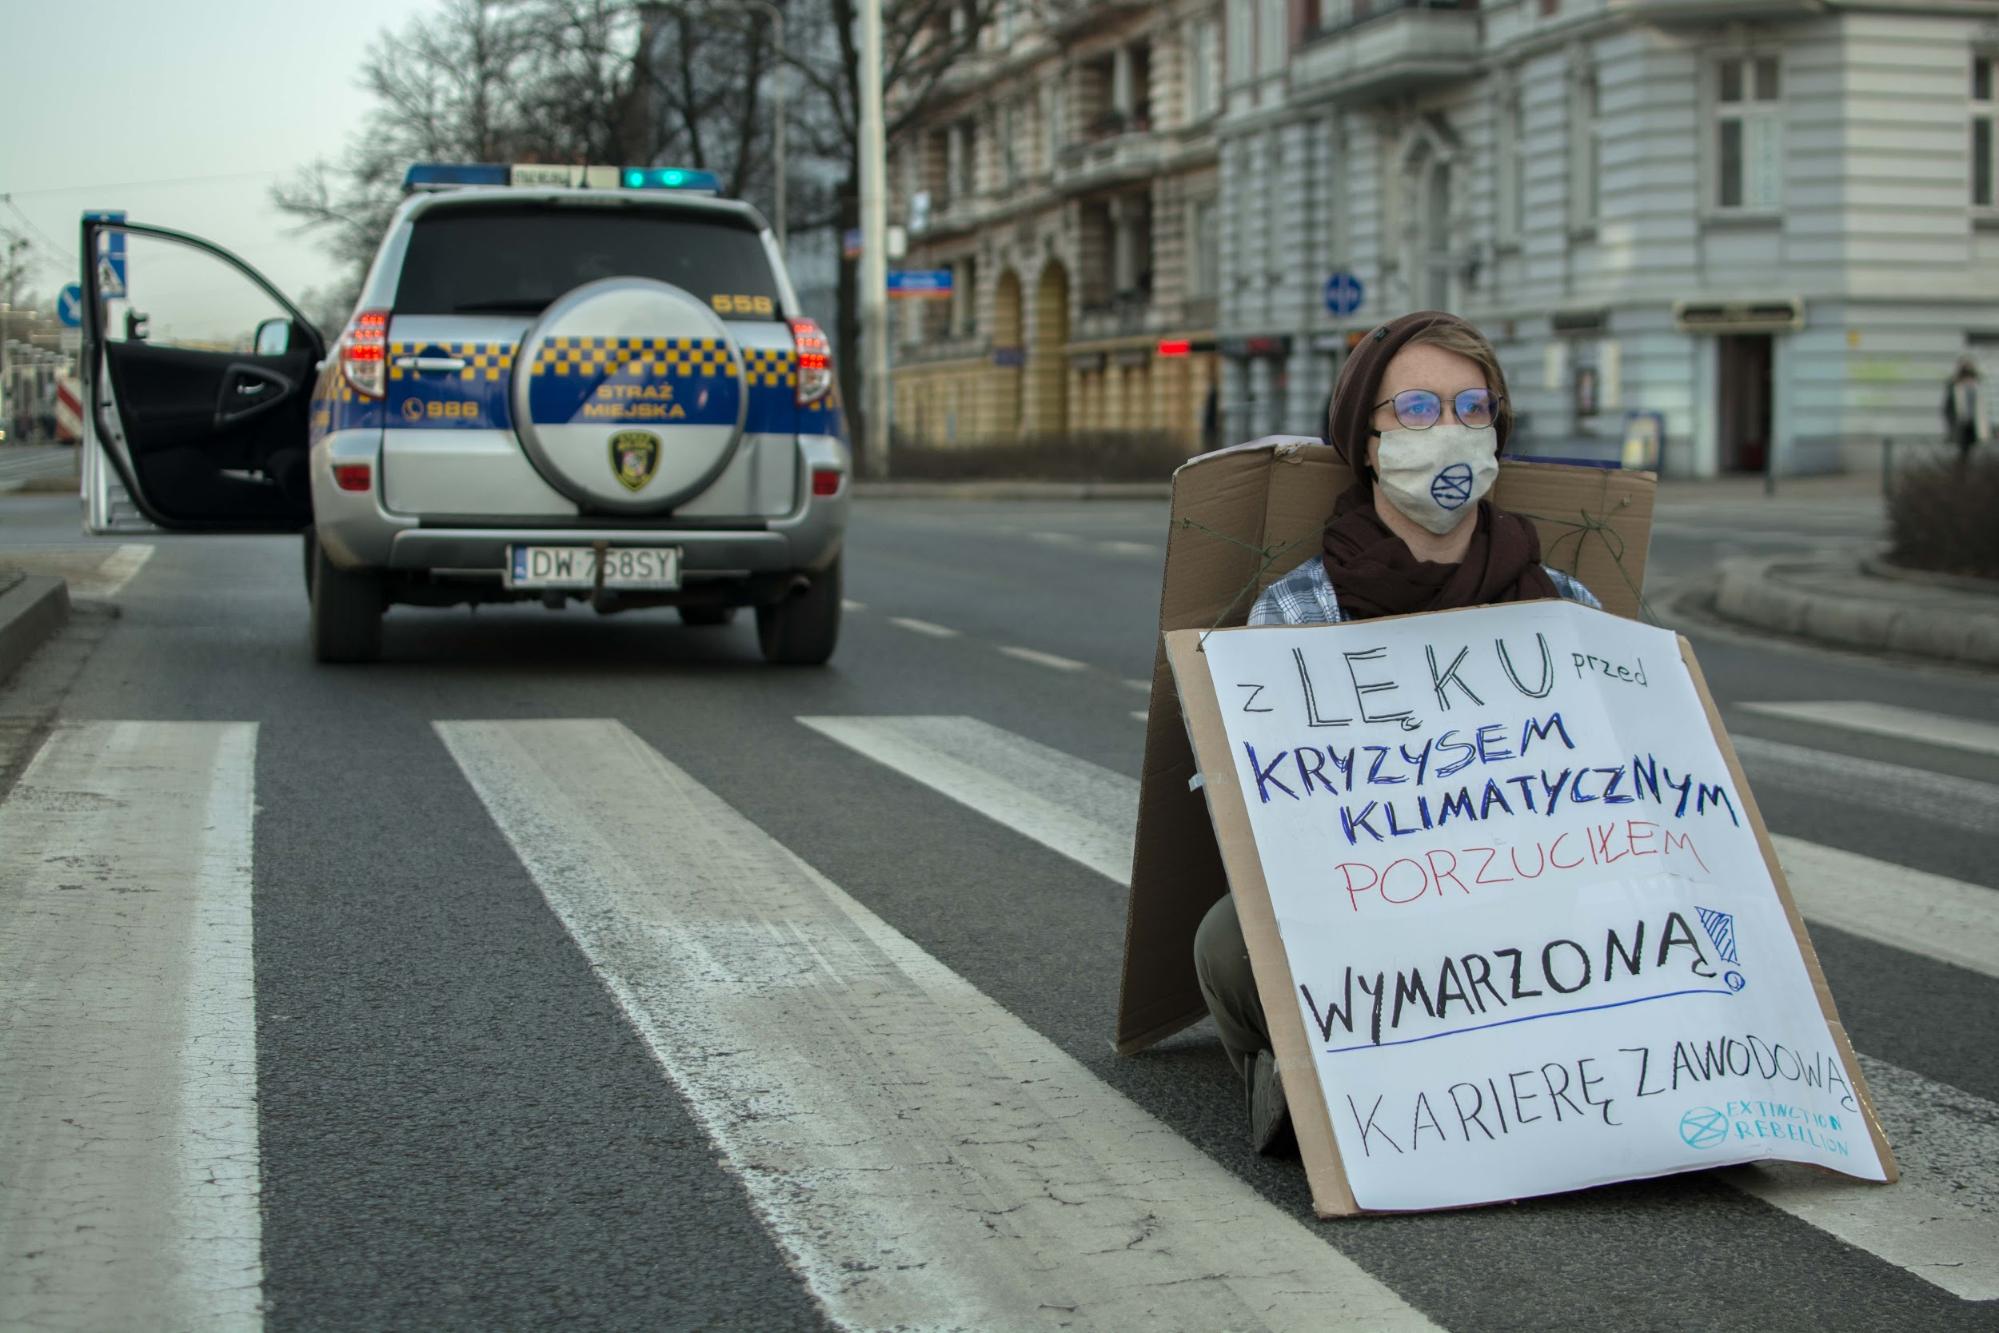 A Rebellion of One in Wrocław. Lone rebels (with hidden support teams)blocked roads across Poland. The banner: ‘Climate crisis fears made me dropmy dream career’. Photo: cyjon & AlicjaKozuchowska